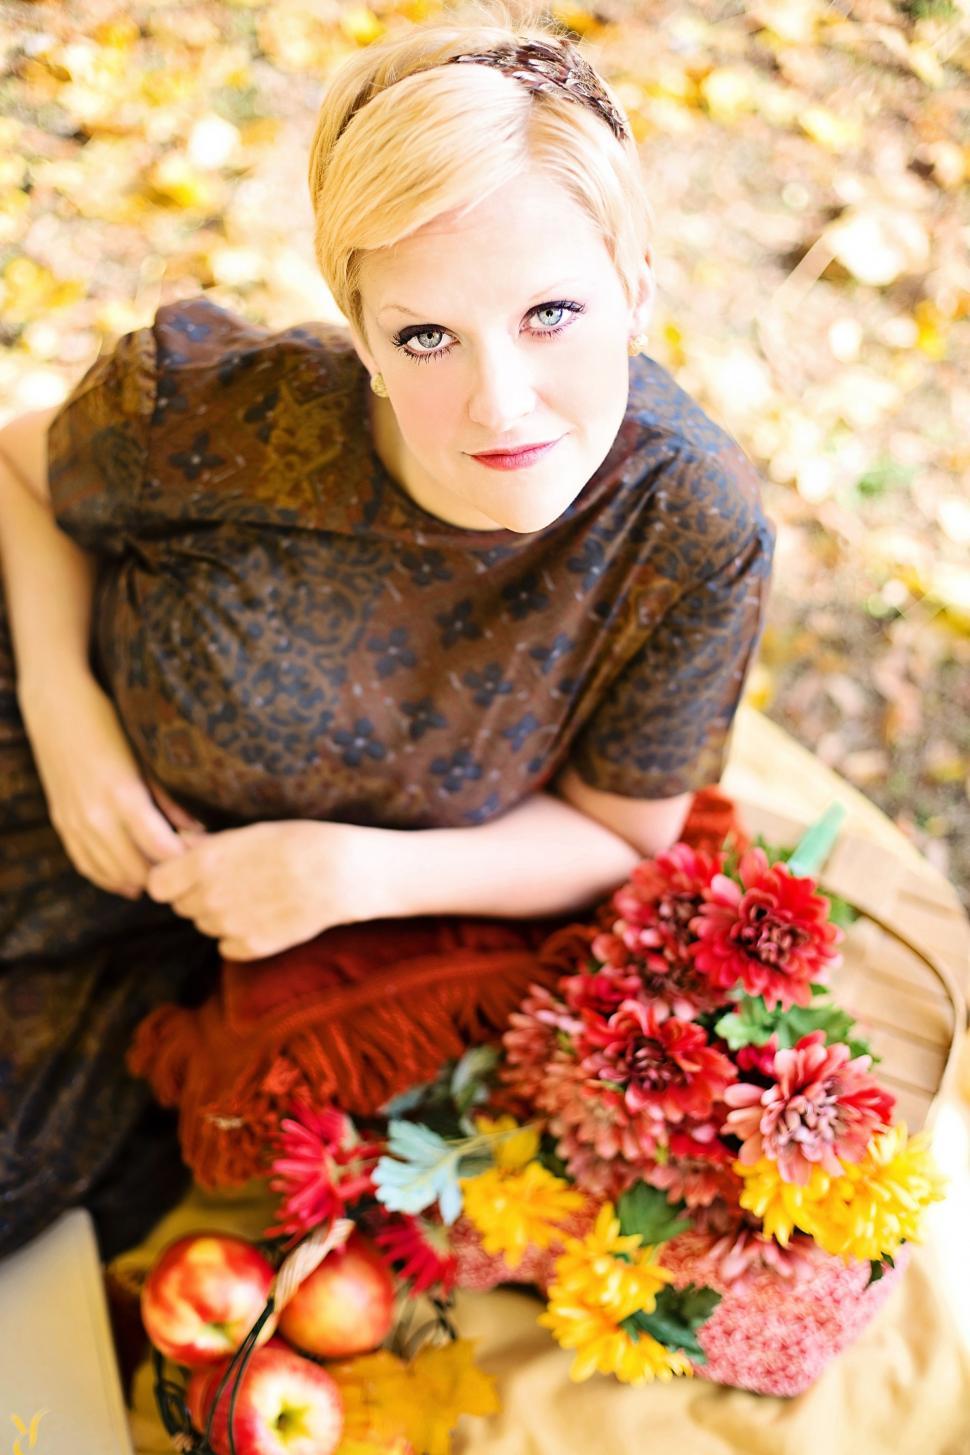 Free Image of Blonde Woman with basket of flowers - looking at camera 